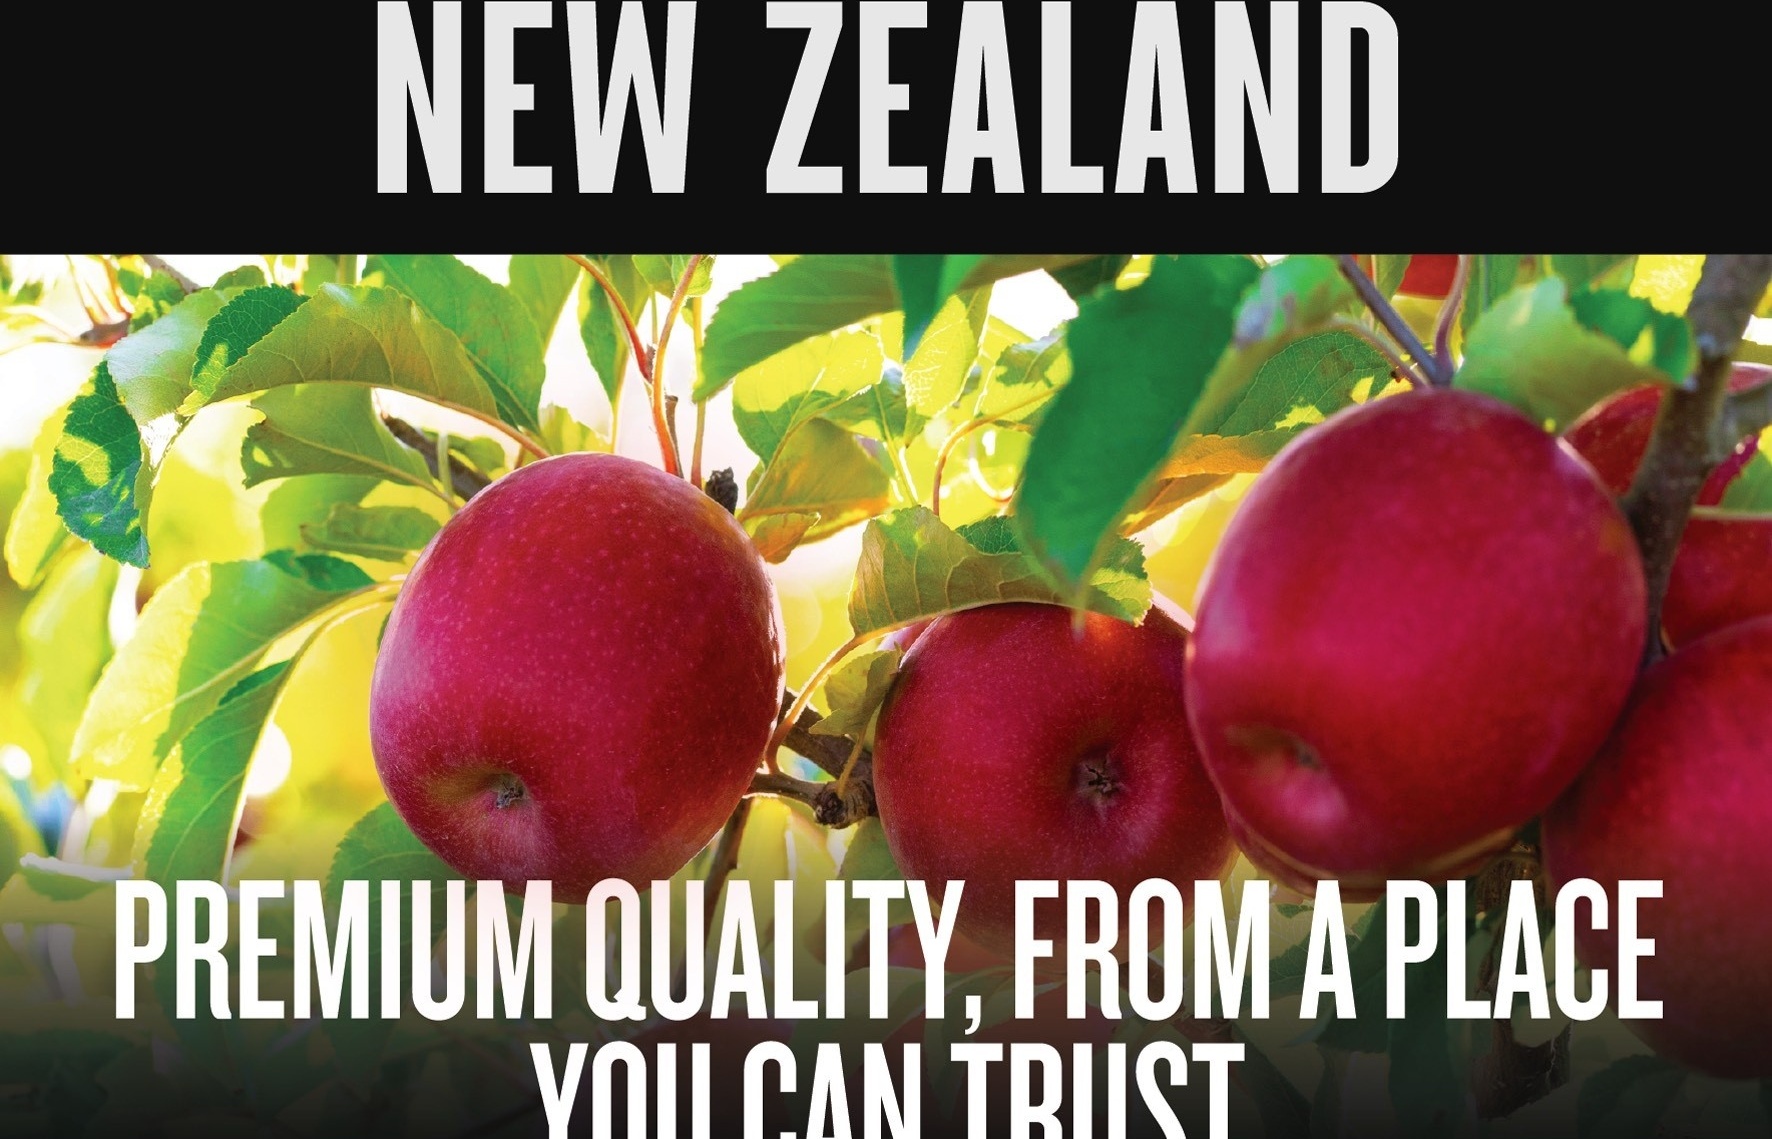 New Zealand's Made With Care campaign launches in five Vietnamese retailers